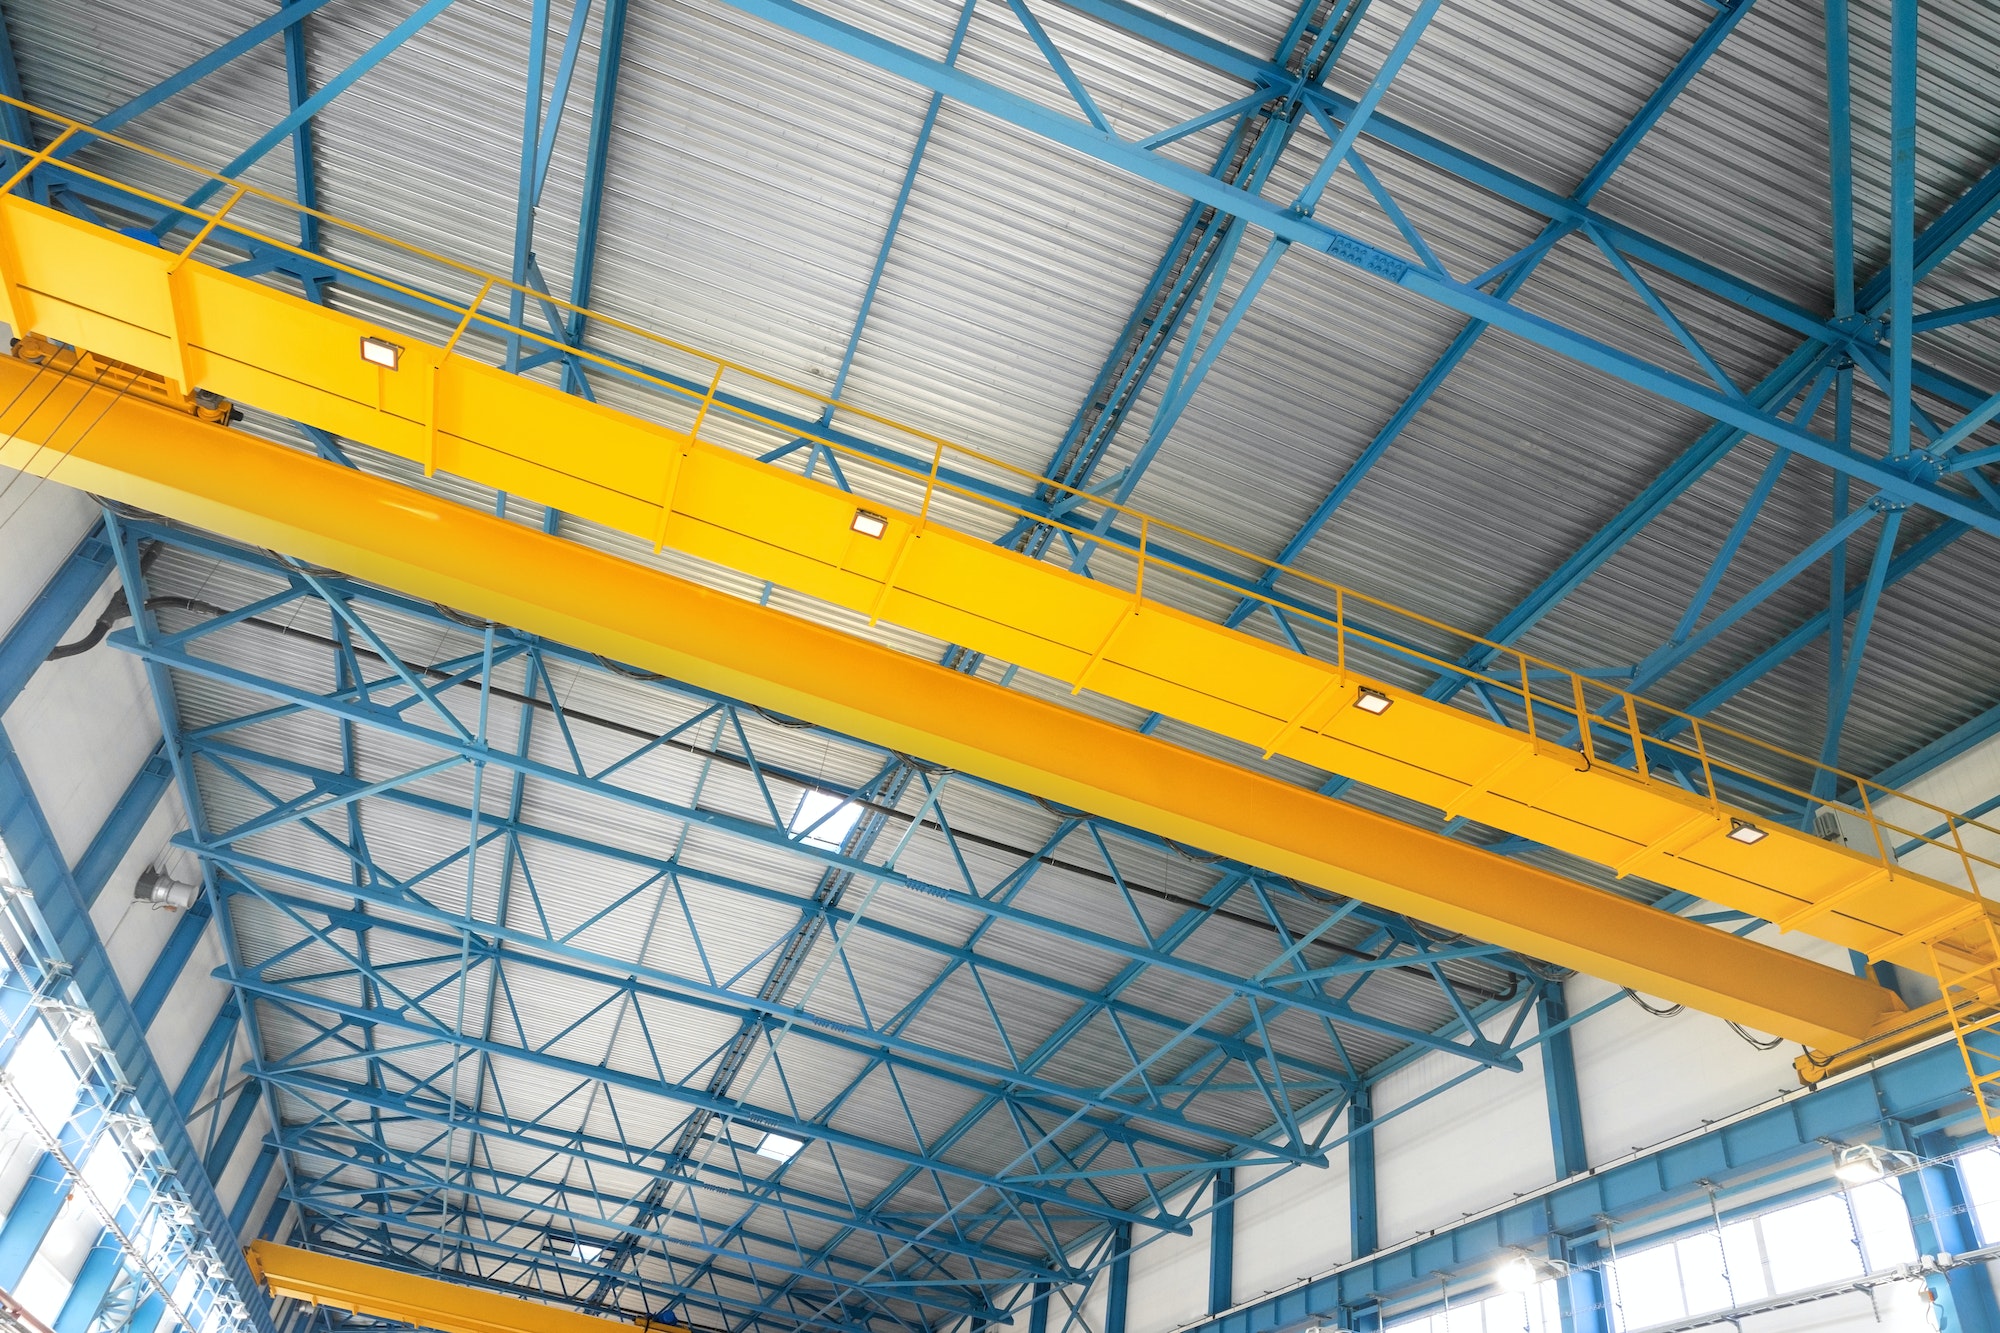 Blue steel frame of metal industrial roof in warehouse with yellow cranes under the ceiling